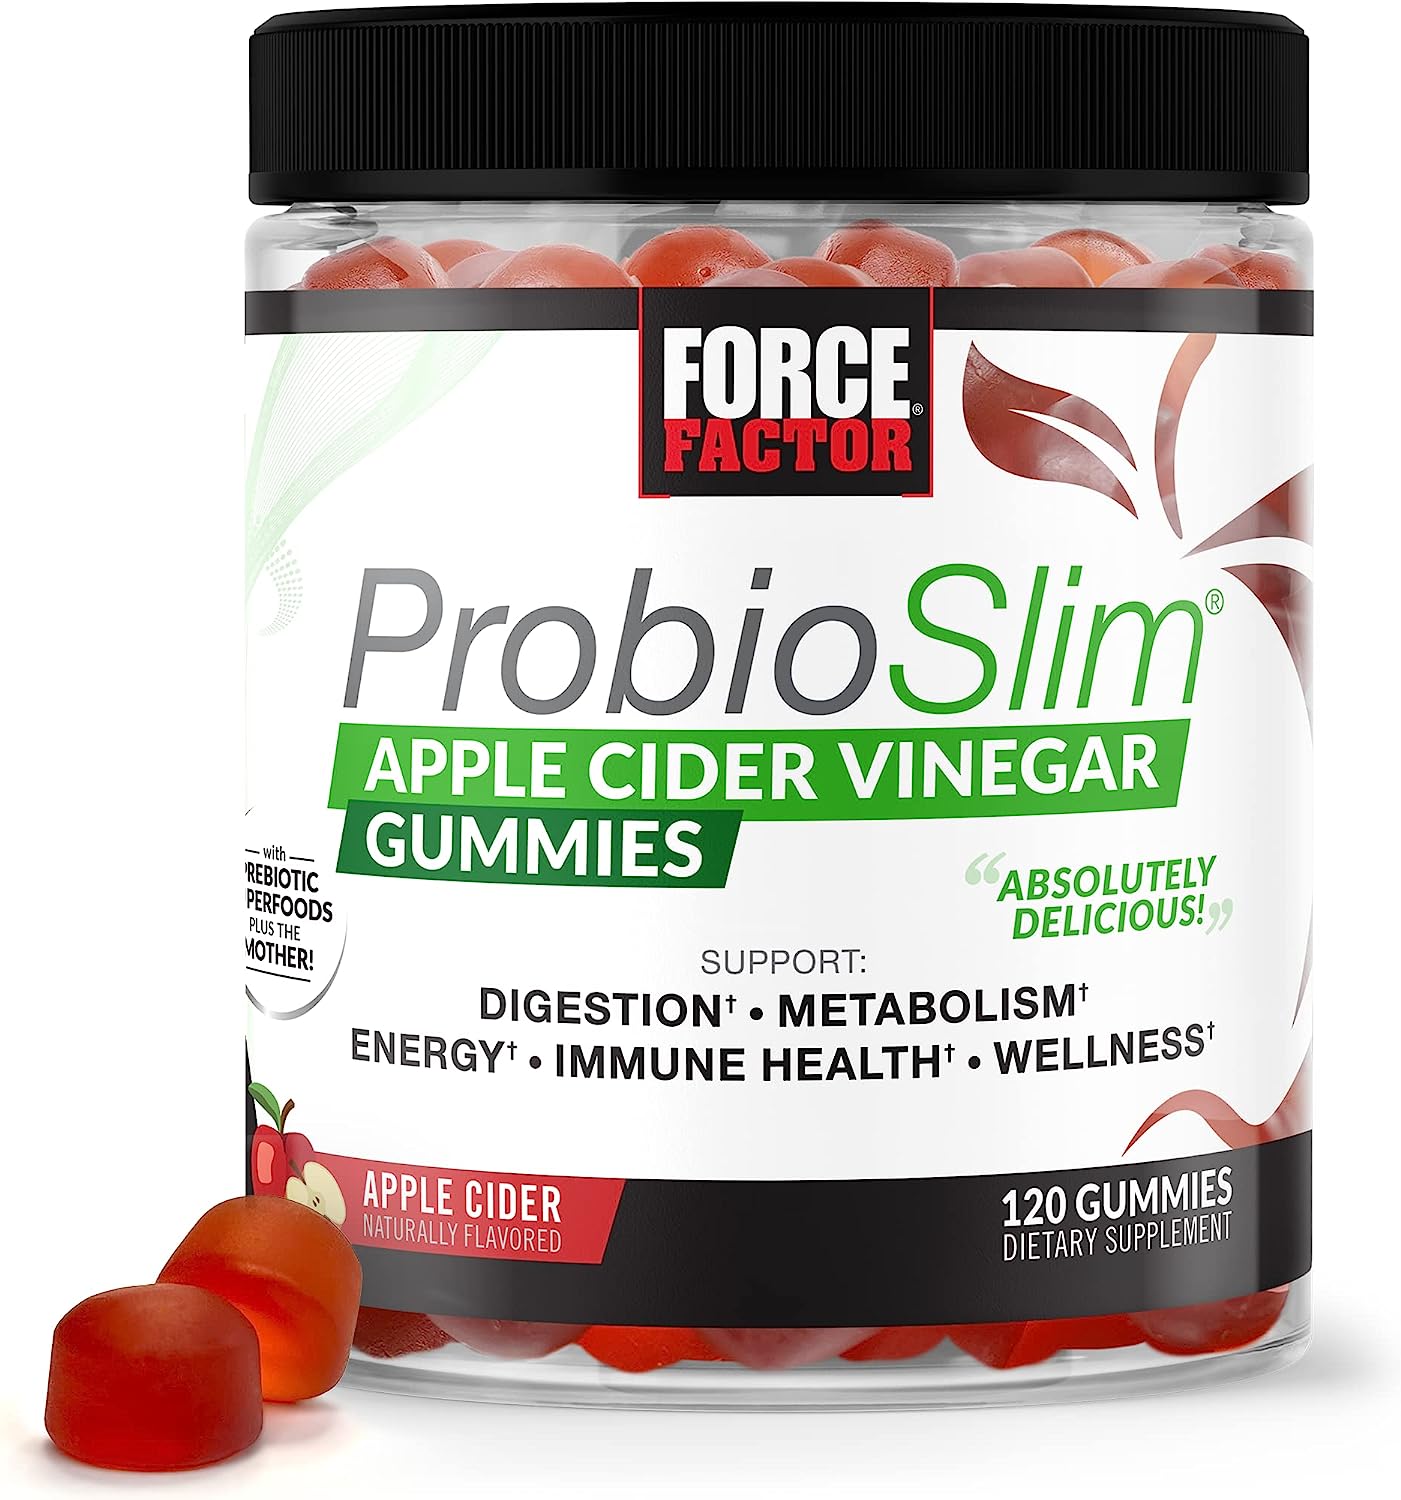 Force Factor ProbioSlim Apple Cider Vinegar Gummies with Organic , LactoSpore Probiotics and Prebiotics to Support Digestion, Metabolism, and Immune Health, 120 Count (Pack of 1)